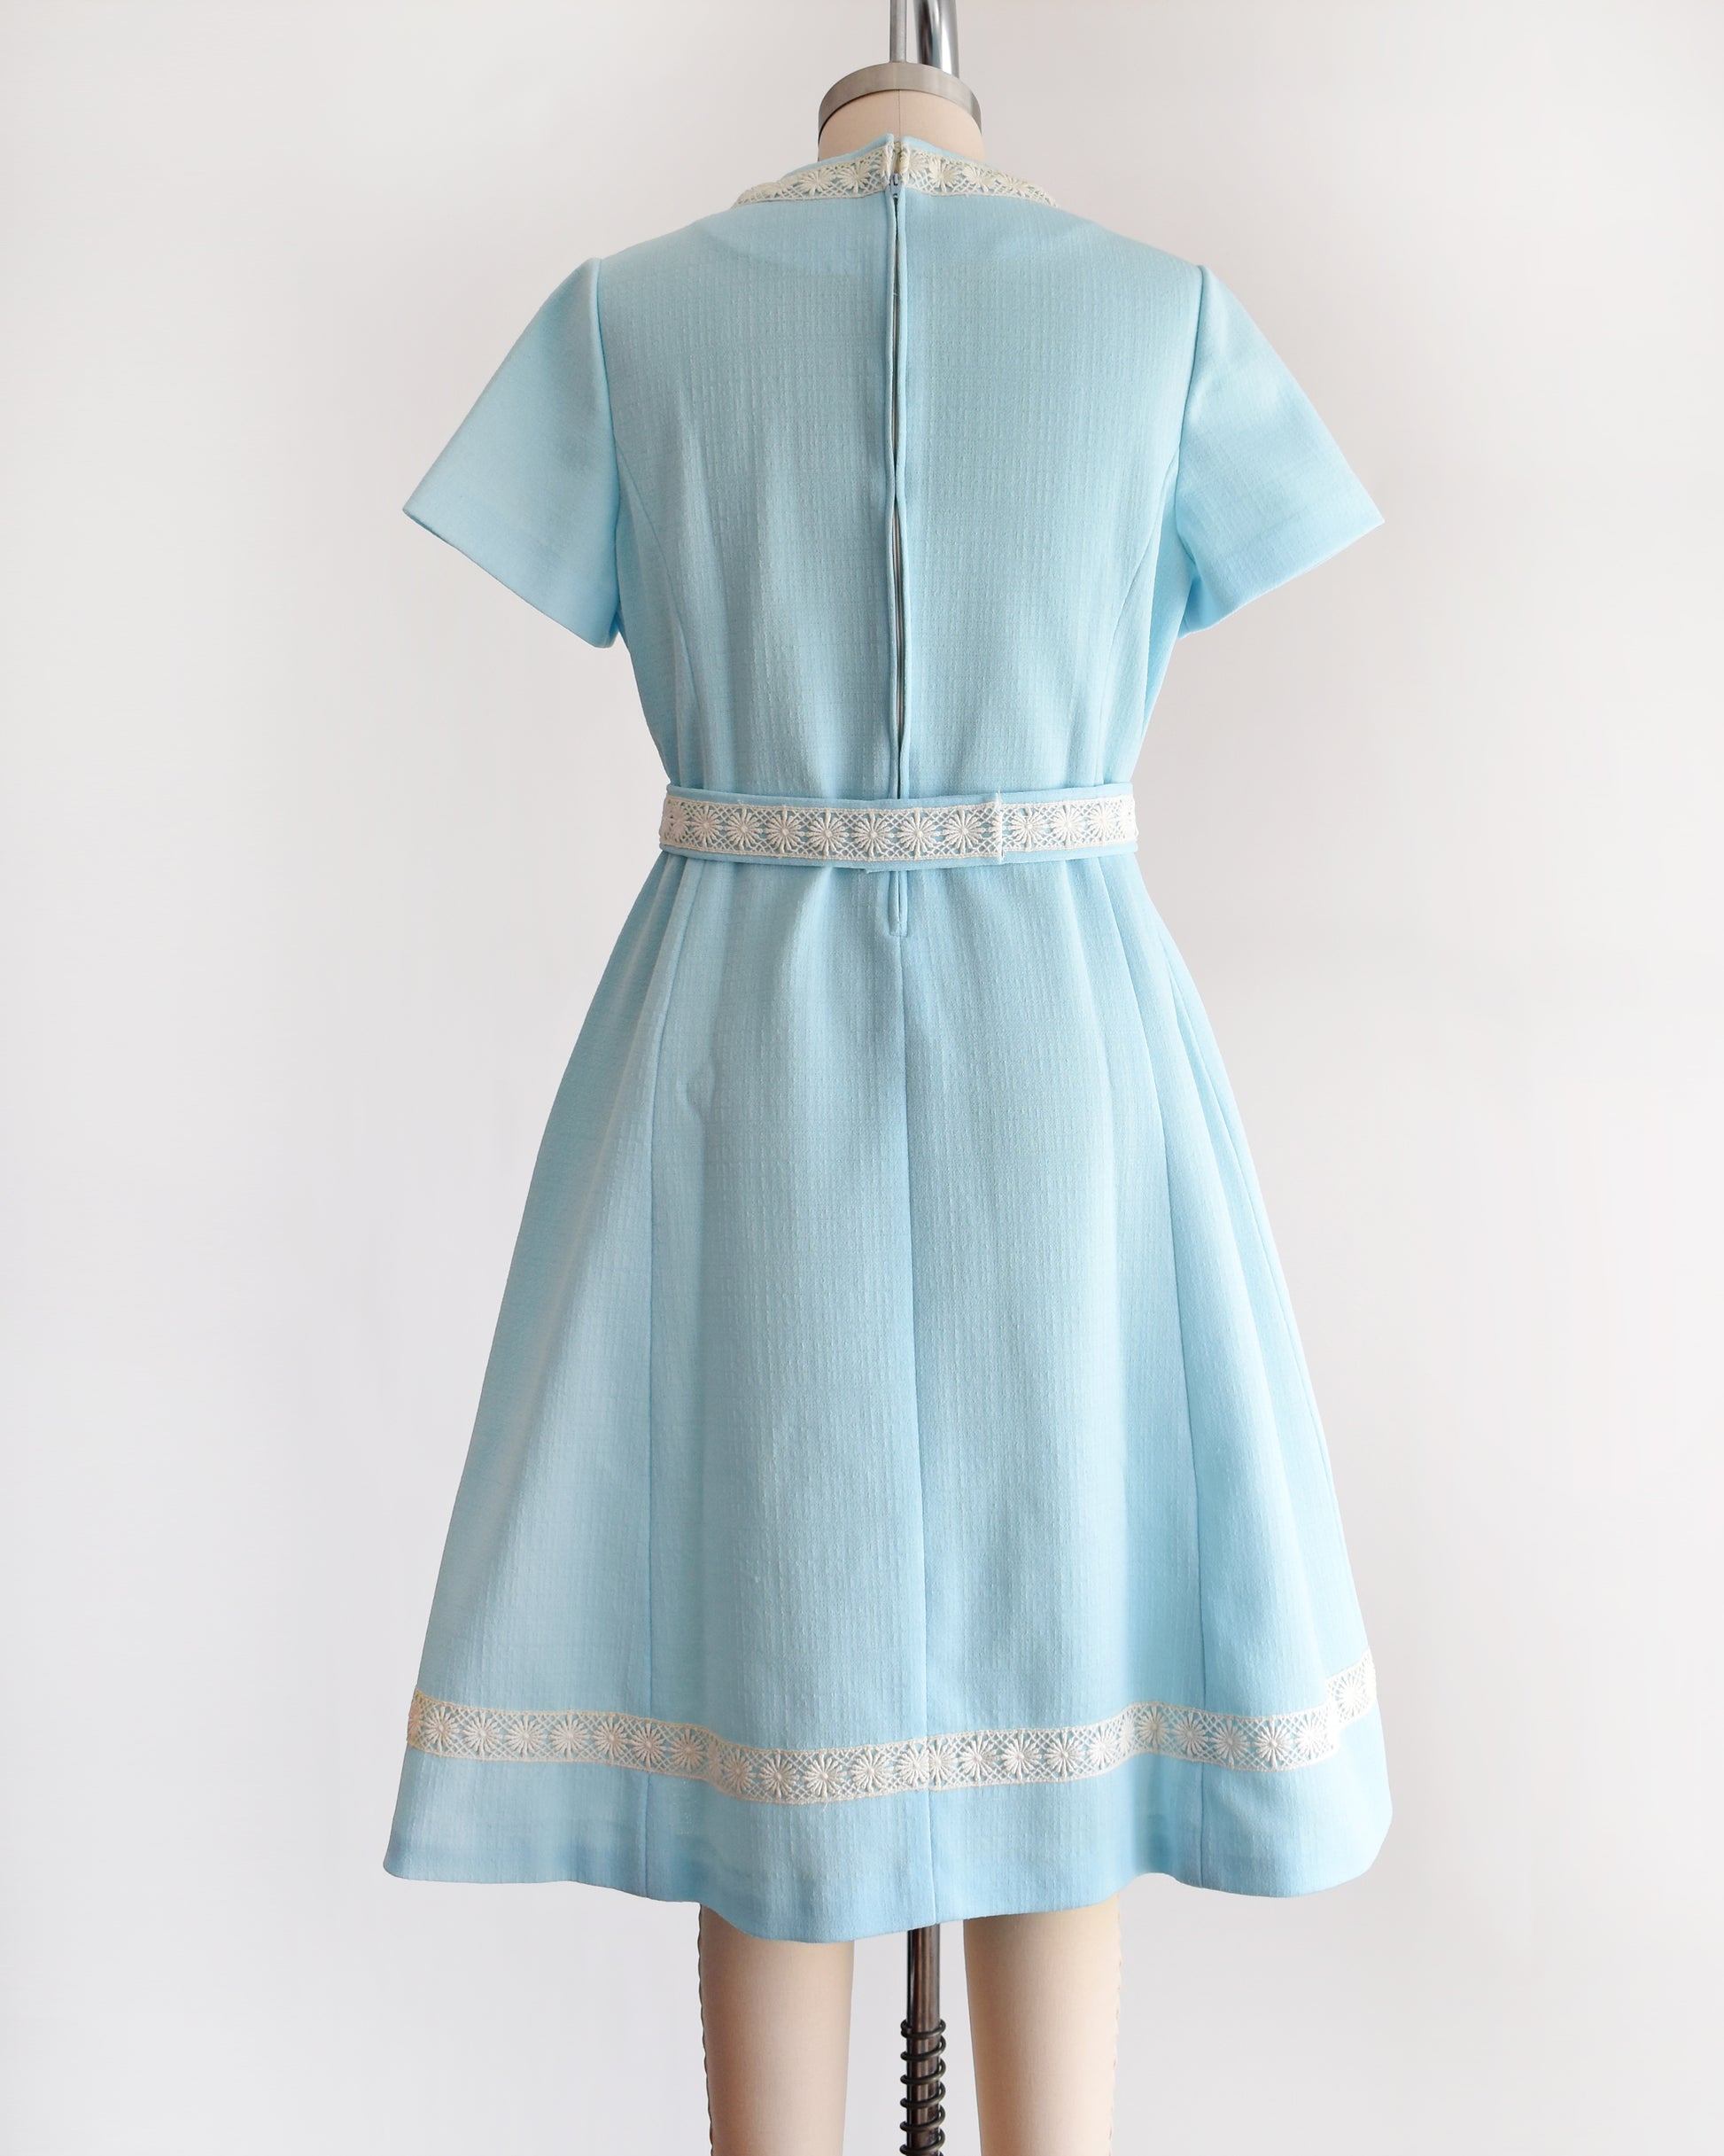 back view of a late 1960s early 1970s vintage mod dress that is light blue and has cream floral lace trim around the collar, belt, and hem